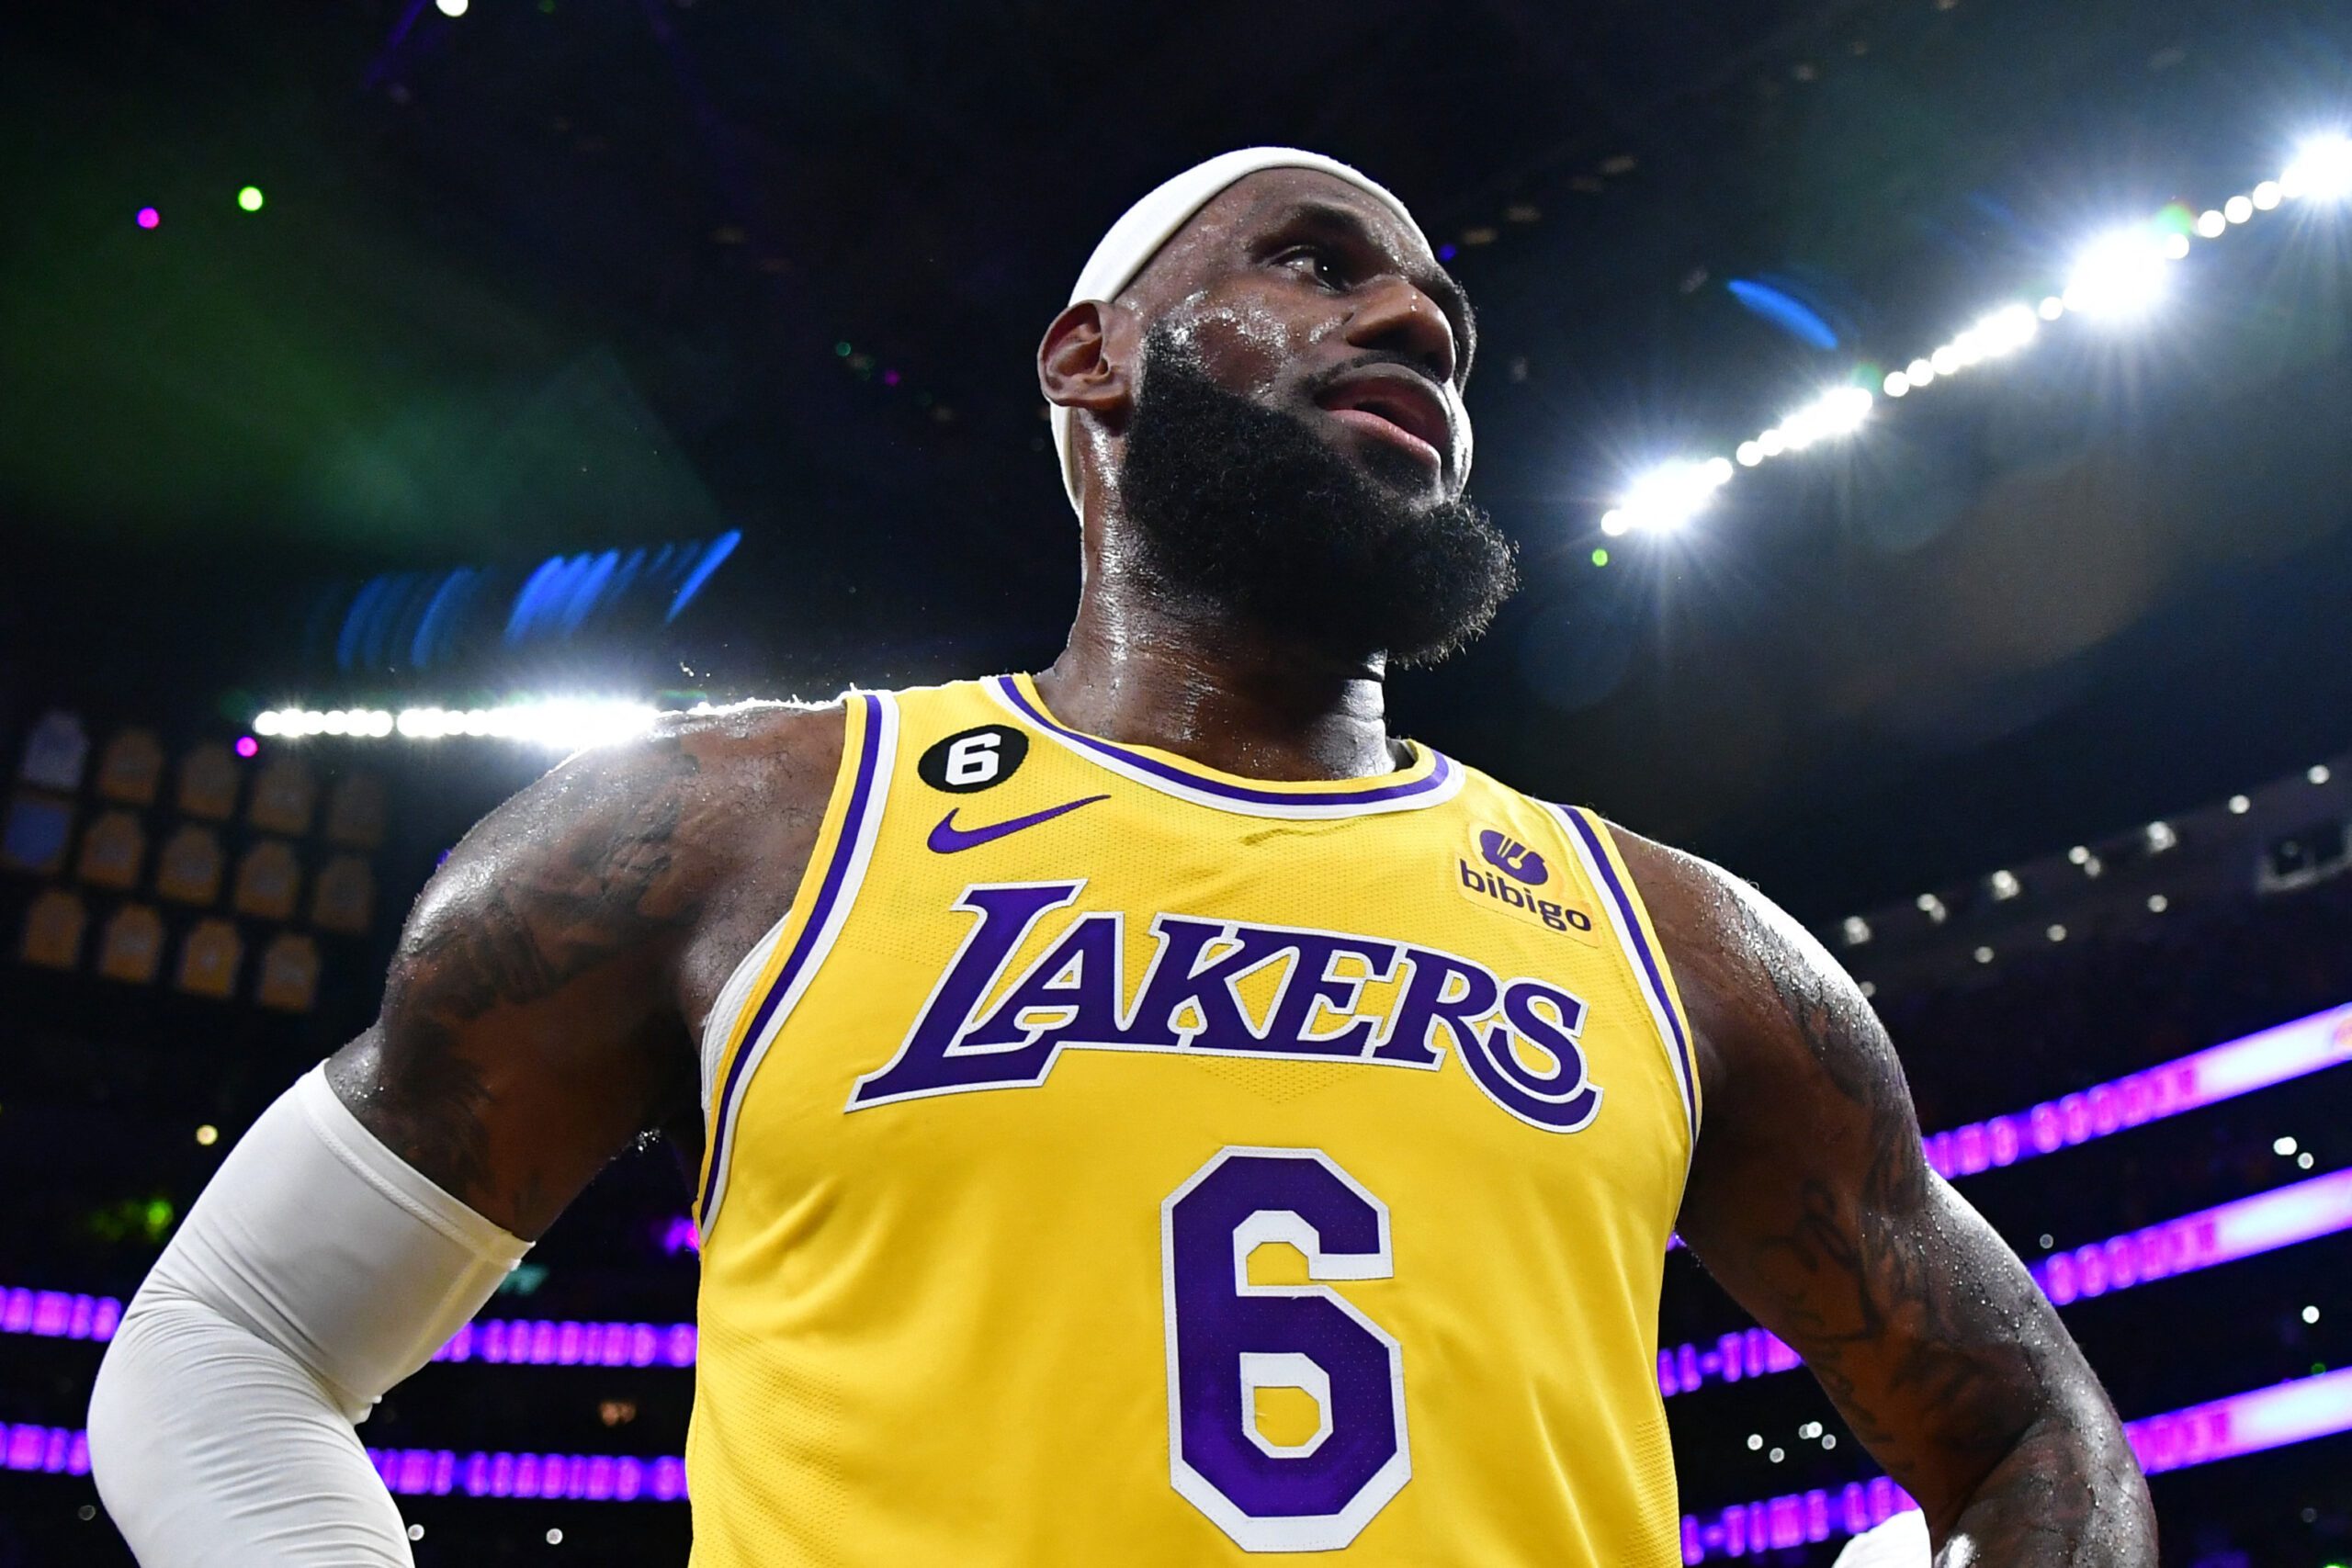 Lakers Rumors: LeBron James will change jersey numbers again next